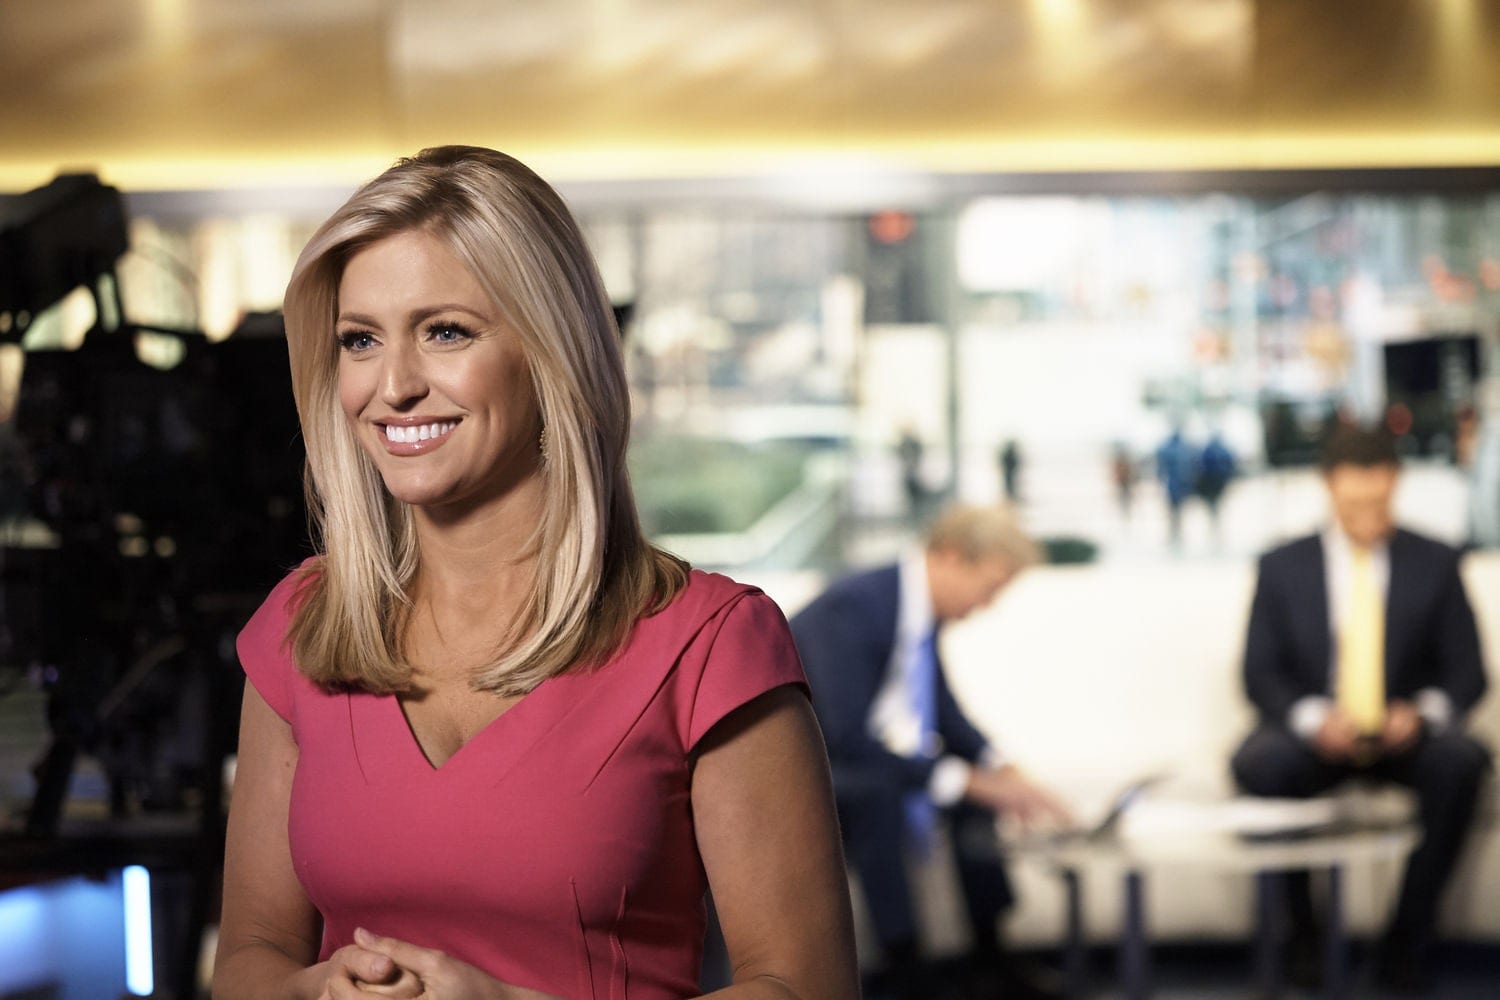 Ainsley Earhardt who is she dating?